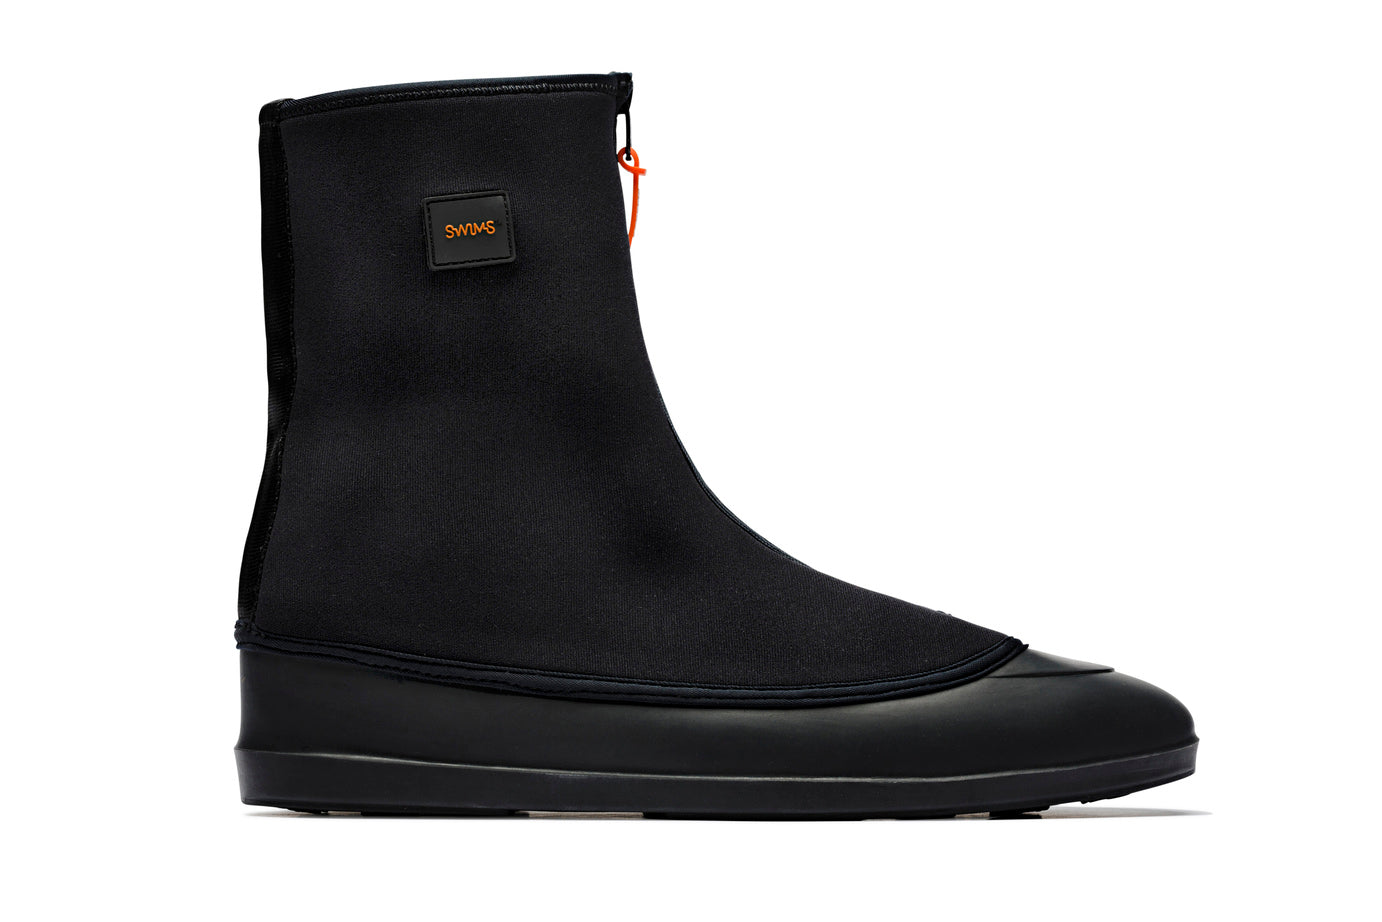 SWIMS Classic Galoshes / Overshoes - Brown – The Hartt Shoe Company